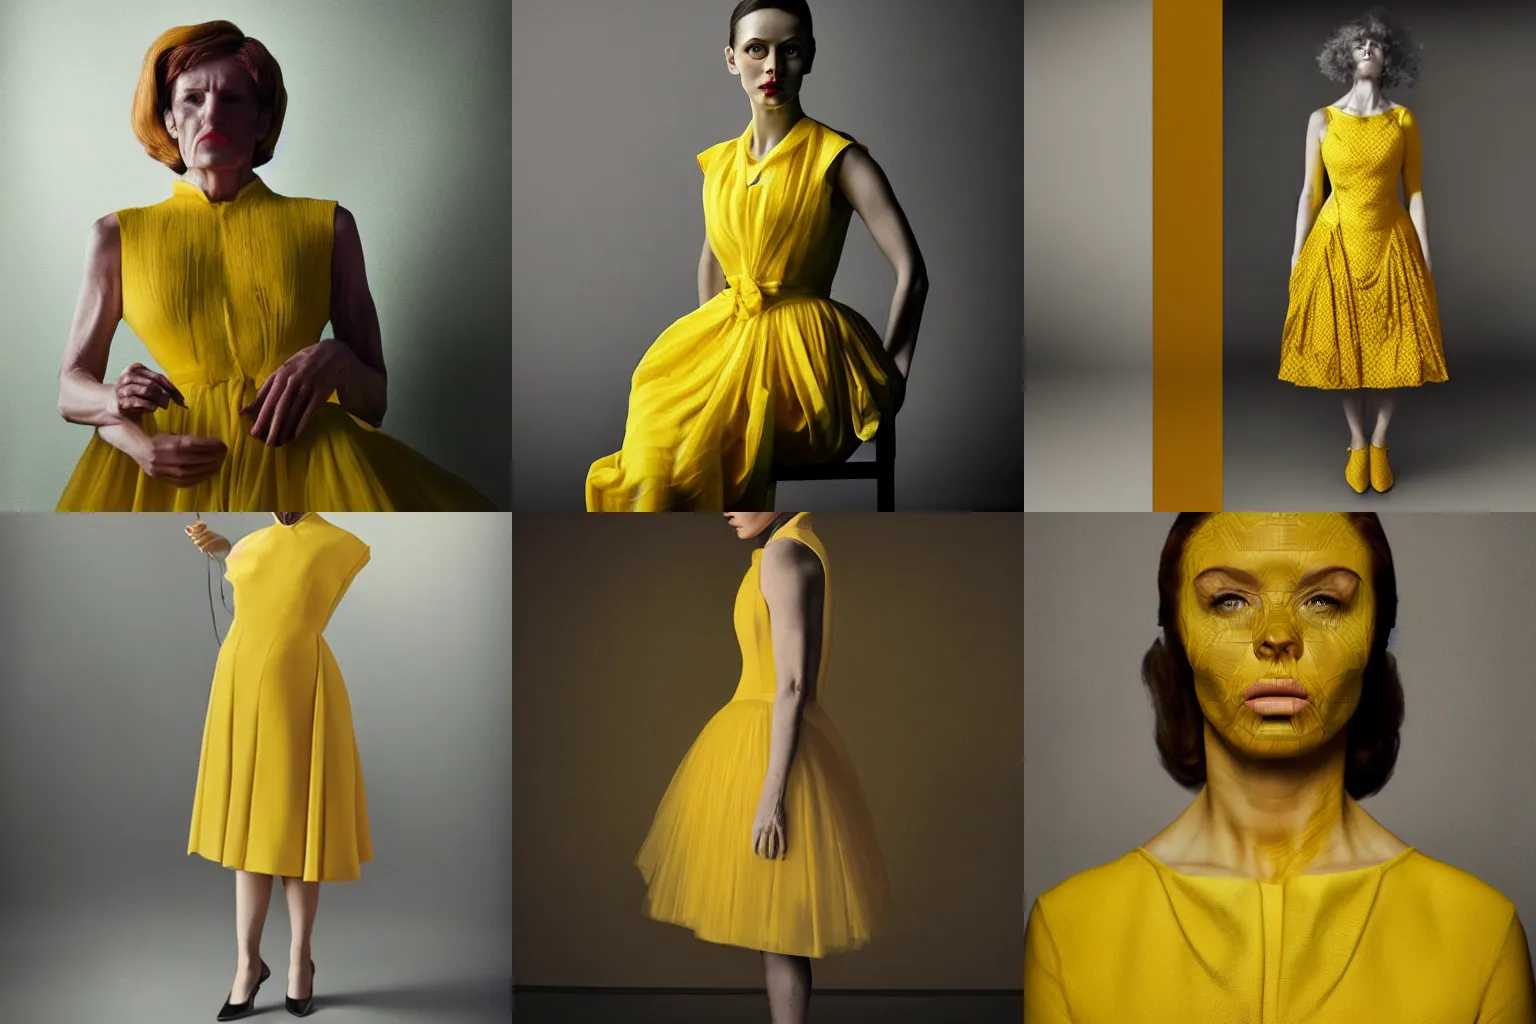 Prompt: photo of a woman in a yellow dress by Erwin Olaf